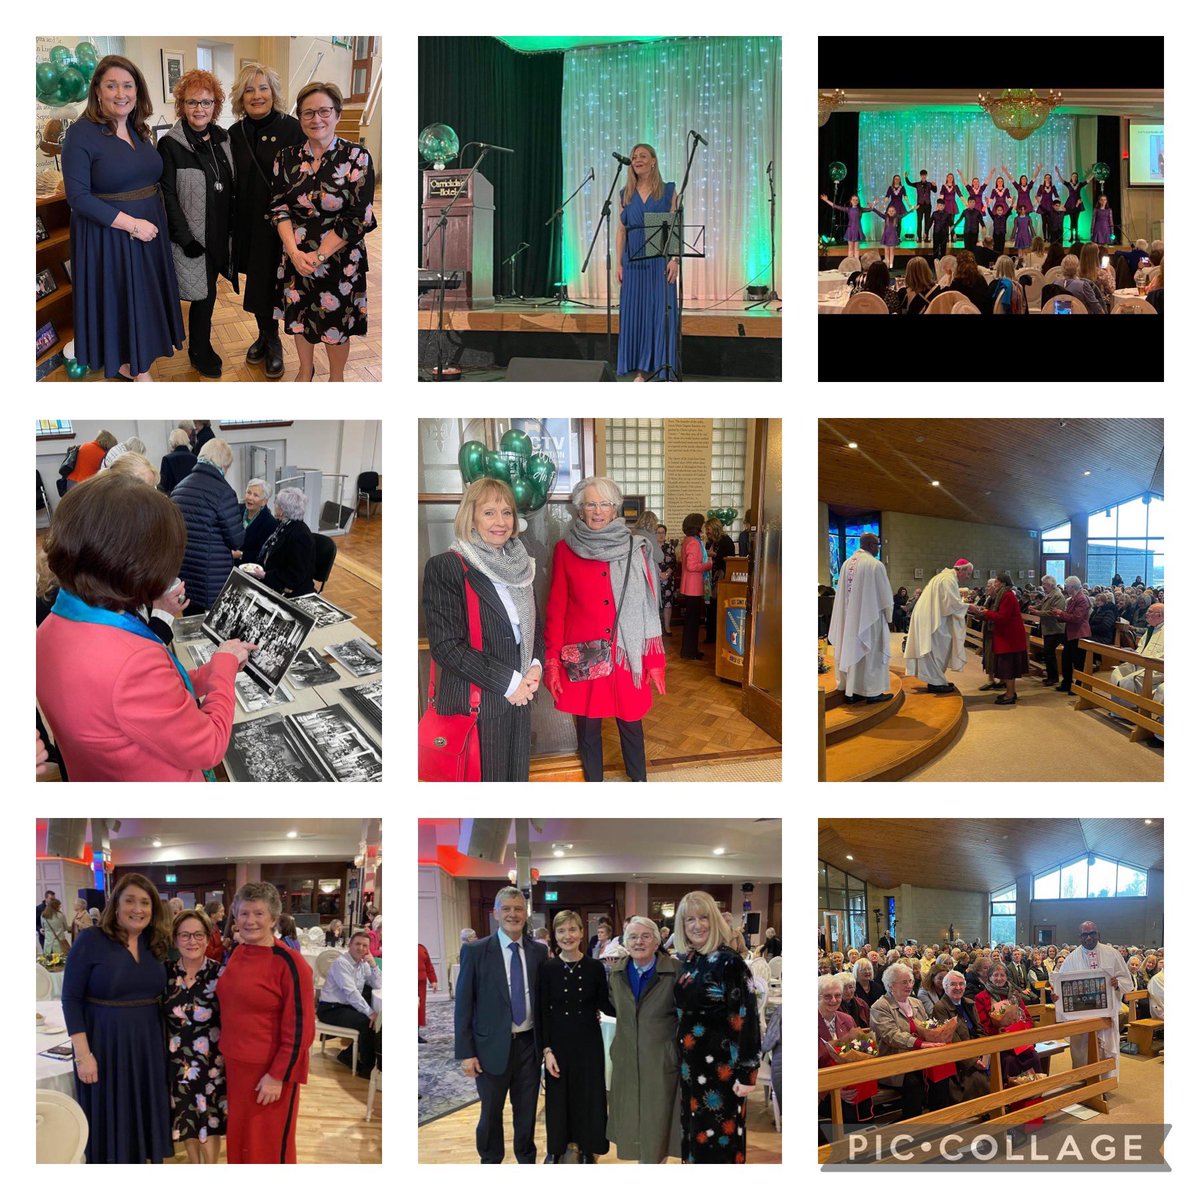 What an amazing day we had on Saturday - a real bitter sweet moment as we said a very fond farewell to our @StLouisDundalk Sisters after 74 Years in Dundalk. Thank you for all you have done for us as we guard your amazing legacy @lecheiletrust1 #Utsintunum 💚